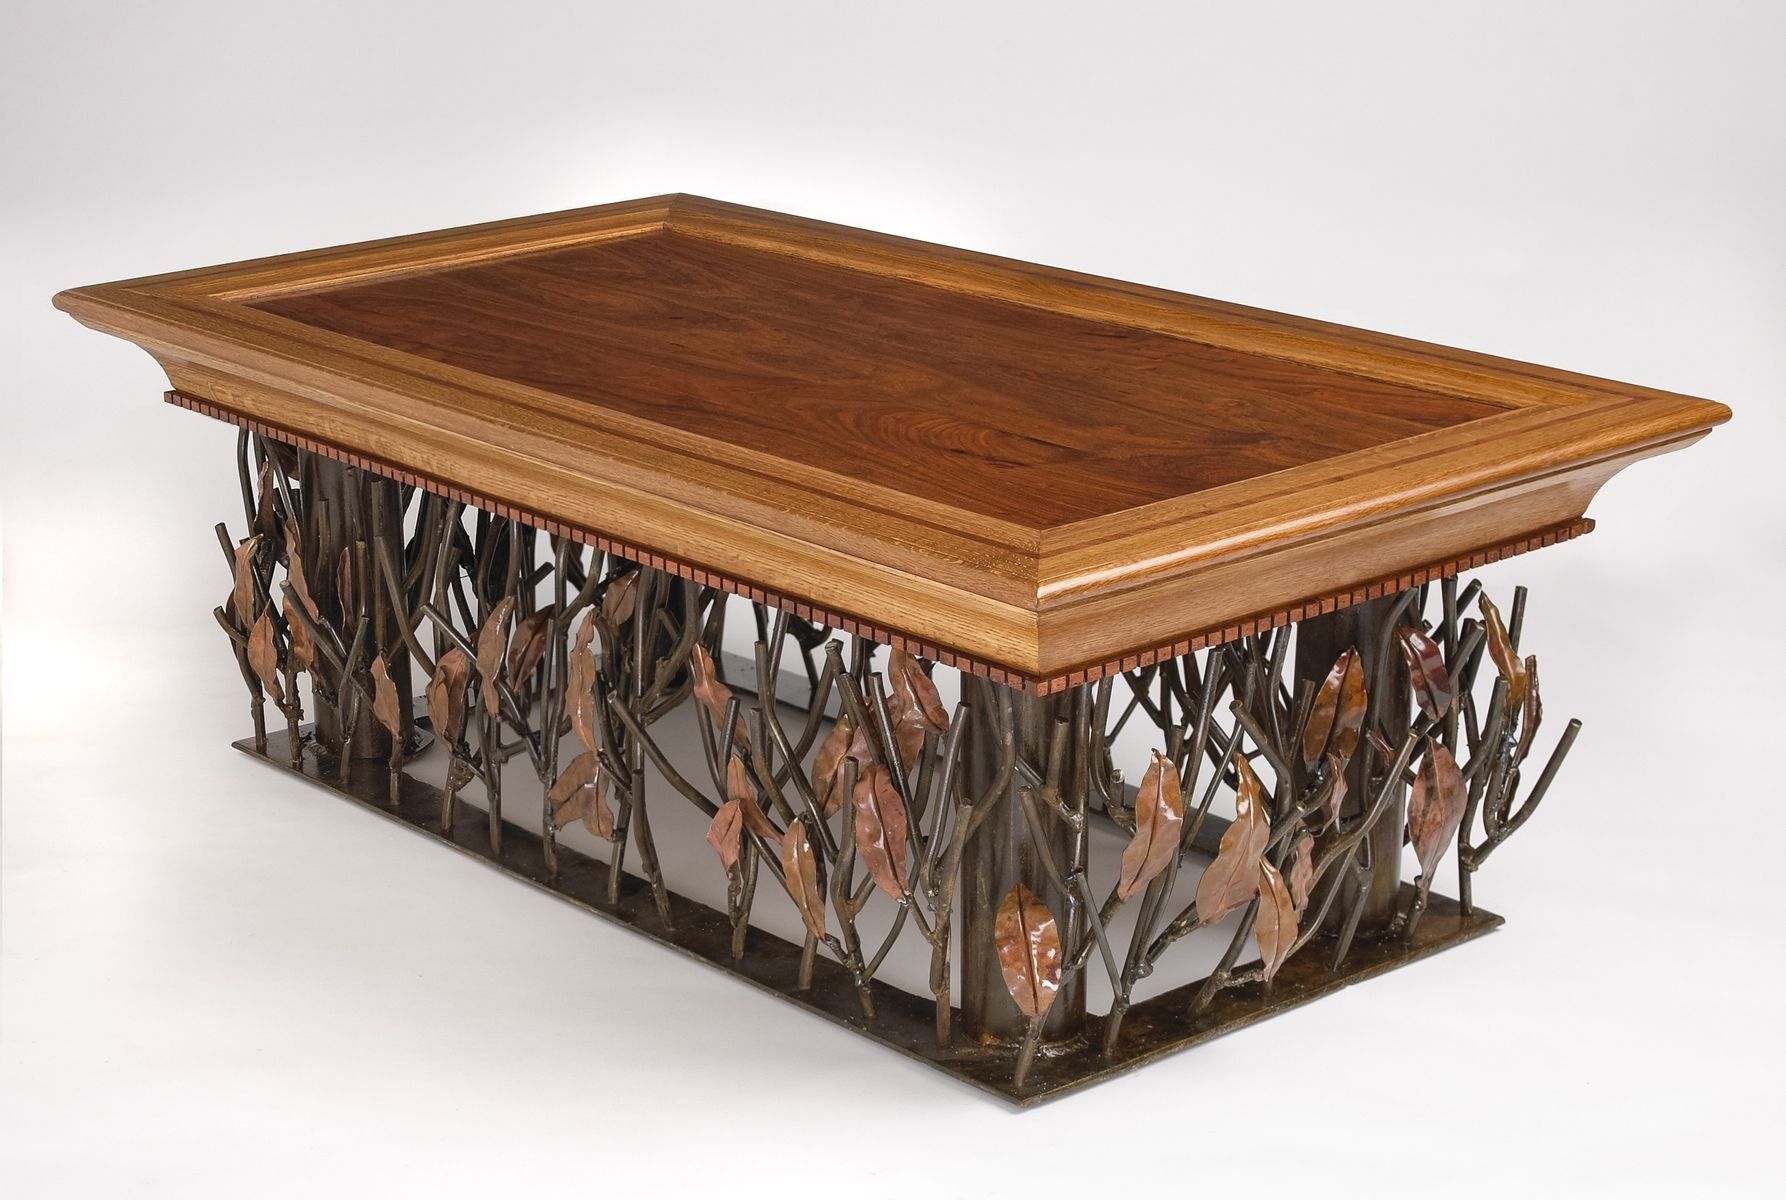 Hand Crafted Mesquite, Steel And Copper Coffee Tablerandy White Intended For Regency Cain Steel Coffee Tables (Gallery 21 of 21)